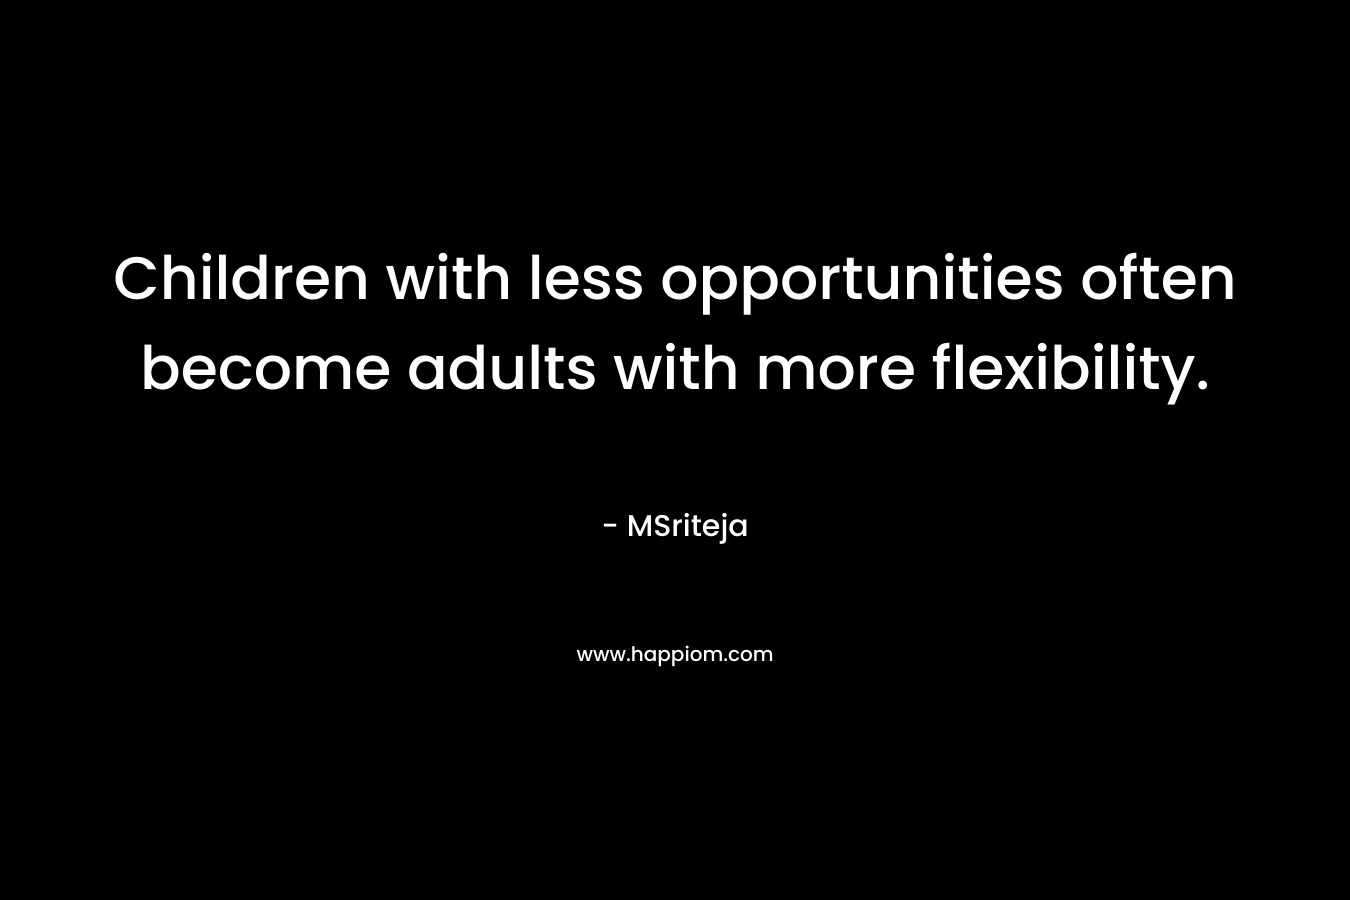 Children with less opportunities often become adults with more flexibility.